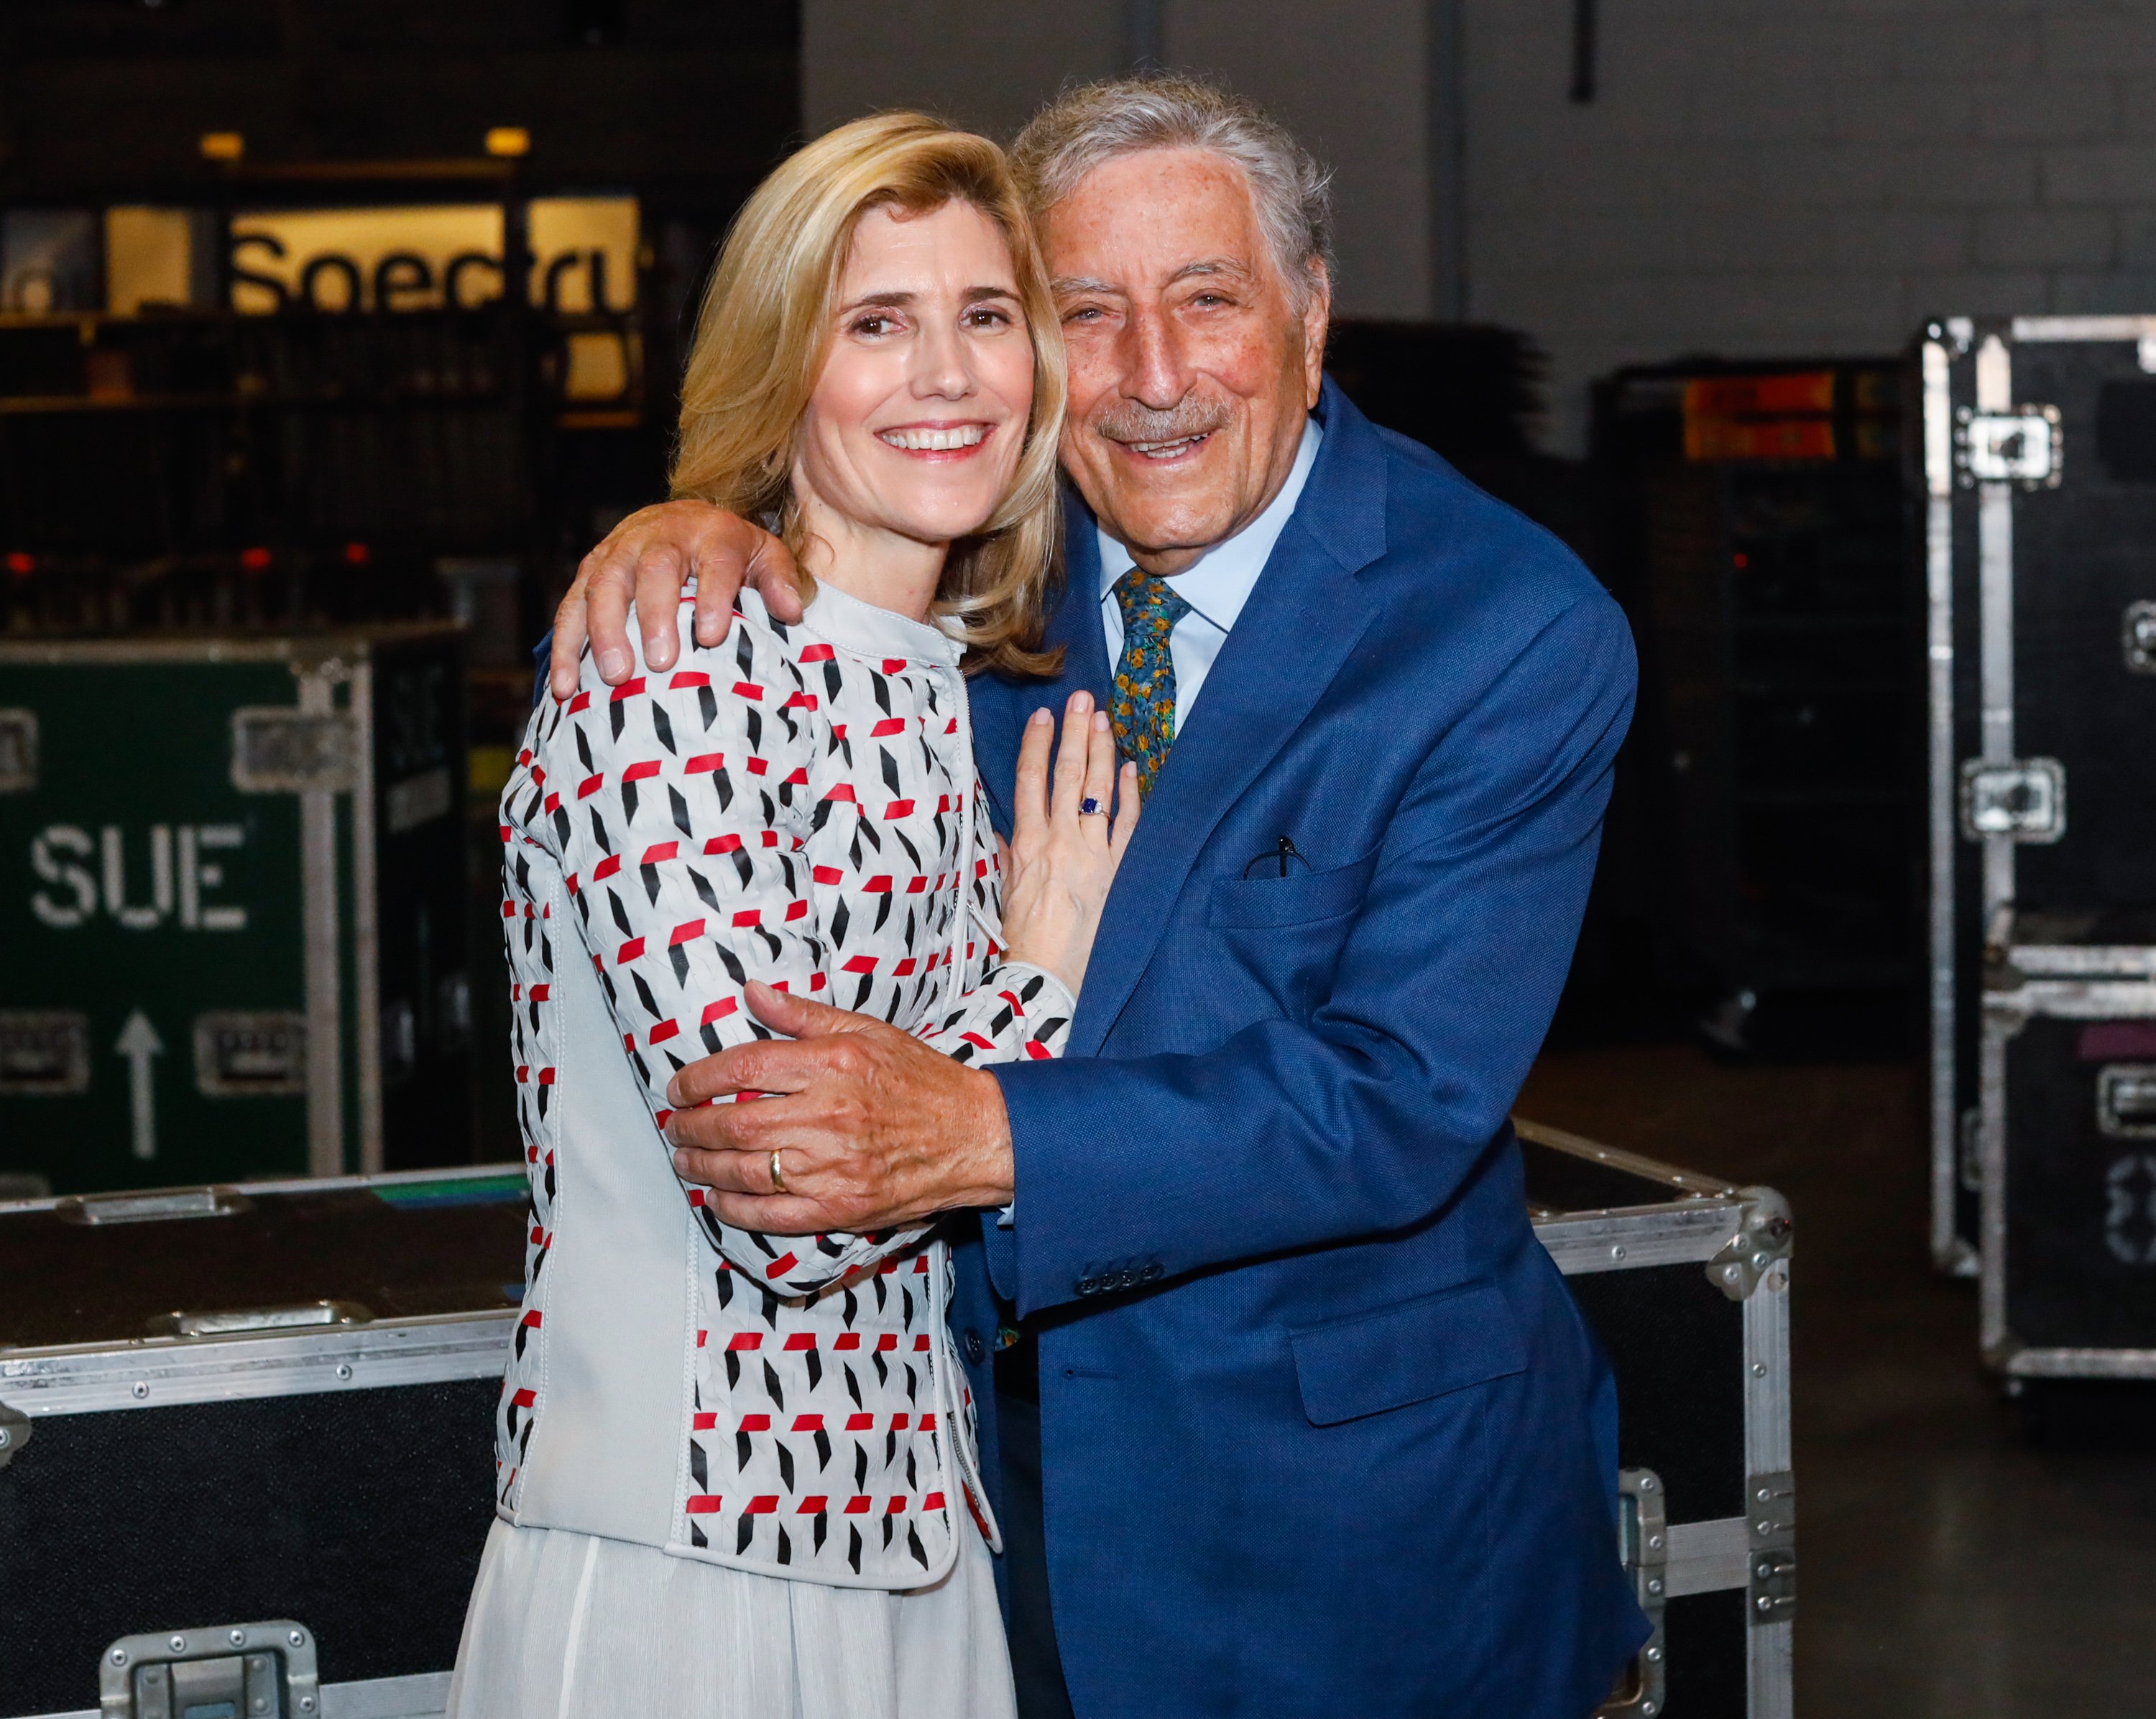 Tony Bennett and Susan Crow backstage attend the 63rd sold out show of Billy Joel's residency at Madison Square Garden on April 12, 2019 in New York City. | Source: Getty Images